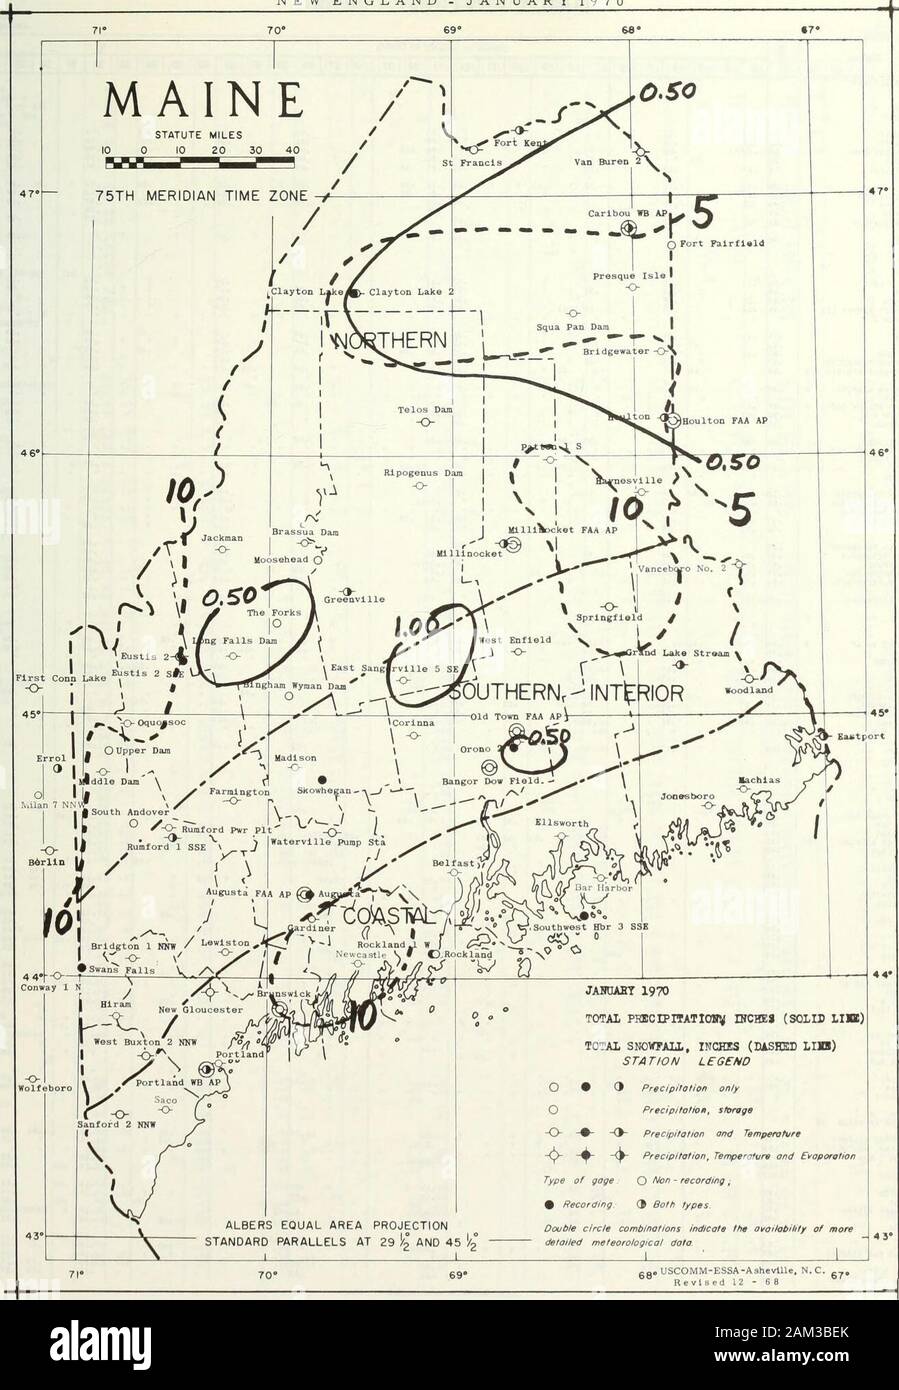 Climatological data, New England . NEW ENGLAND - JANUARY 1970. - 7 - DAILY PRECIPITATION !! station £ Day of Month .2 1 2 3 4 I 5 1 6 7 1 e I 9 10 1 n 1 12 13 14 15 16 17 I 18 19 1 20 21 22 1 23 24 25 26 27 28 29 I 30 31 CONNECTICUT • • • MO&gt;THIIEST 01 BAKERSVILLE .74 .32 .11 .10 .03 .08 .02 .03 .02 .03 BARKHAMSTED .68 .29 ? 11 .09 .01 .04 .01 .06 .06 .01 BULLS BRIDGE DAM .69 .22 .09 .01 .06 .03 .01 .09 .01 .04 .07 .06 CREAH HILL .SI .08 T .01 T .17 .01 T .05 .05 T .02 T .03 .09 FALLS VILLAGE .79 .22 .09 .03 T .01 .07 .02 .09 .05 .03 .04 .09 .05 NORFOLK 2 SU 1.06 .32 .11 .03 T .01 T T .04 . Stock Photo